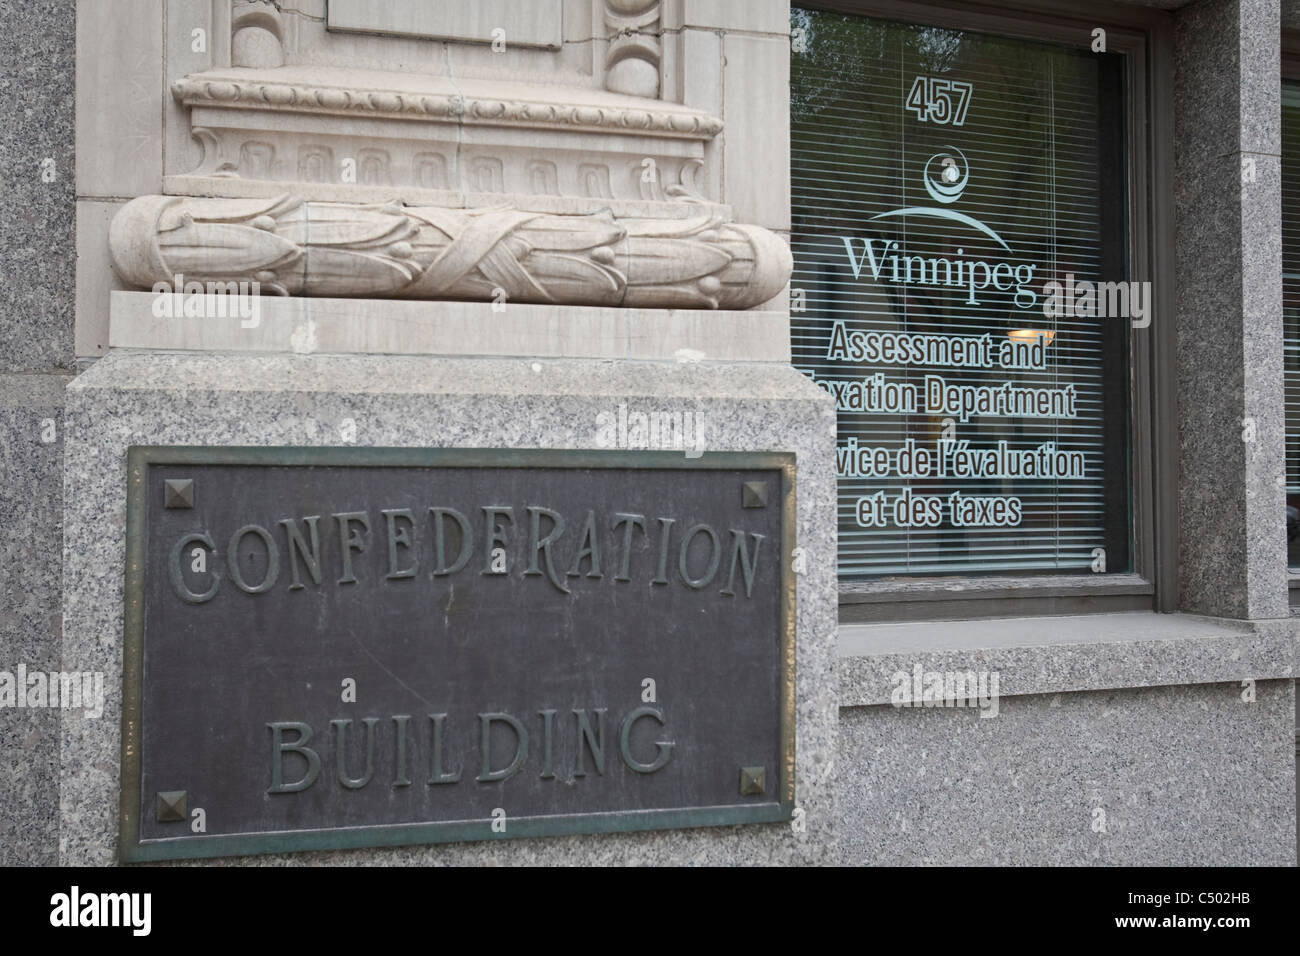 Winnipeg Assessment and taxation Department is pictured the Confederation building in Winnipeg Monday May 23, 2011. Stock Photo